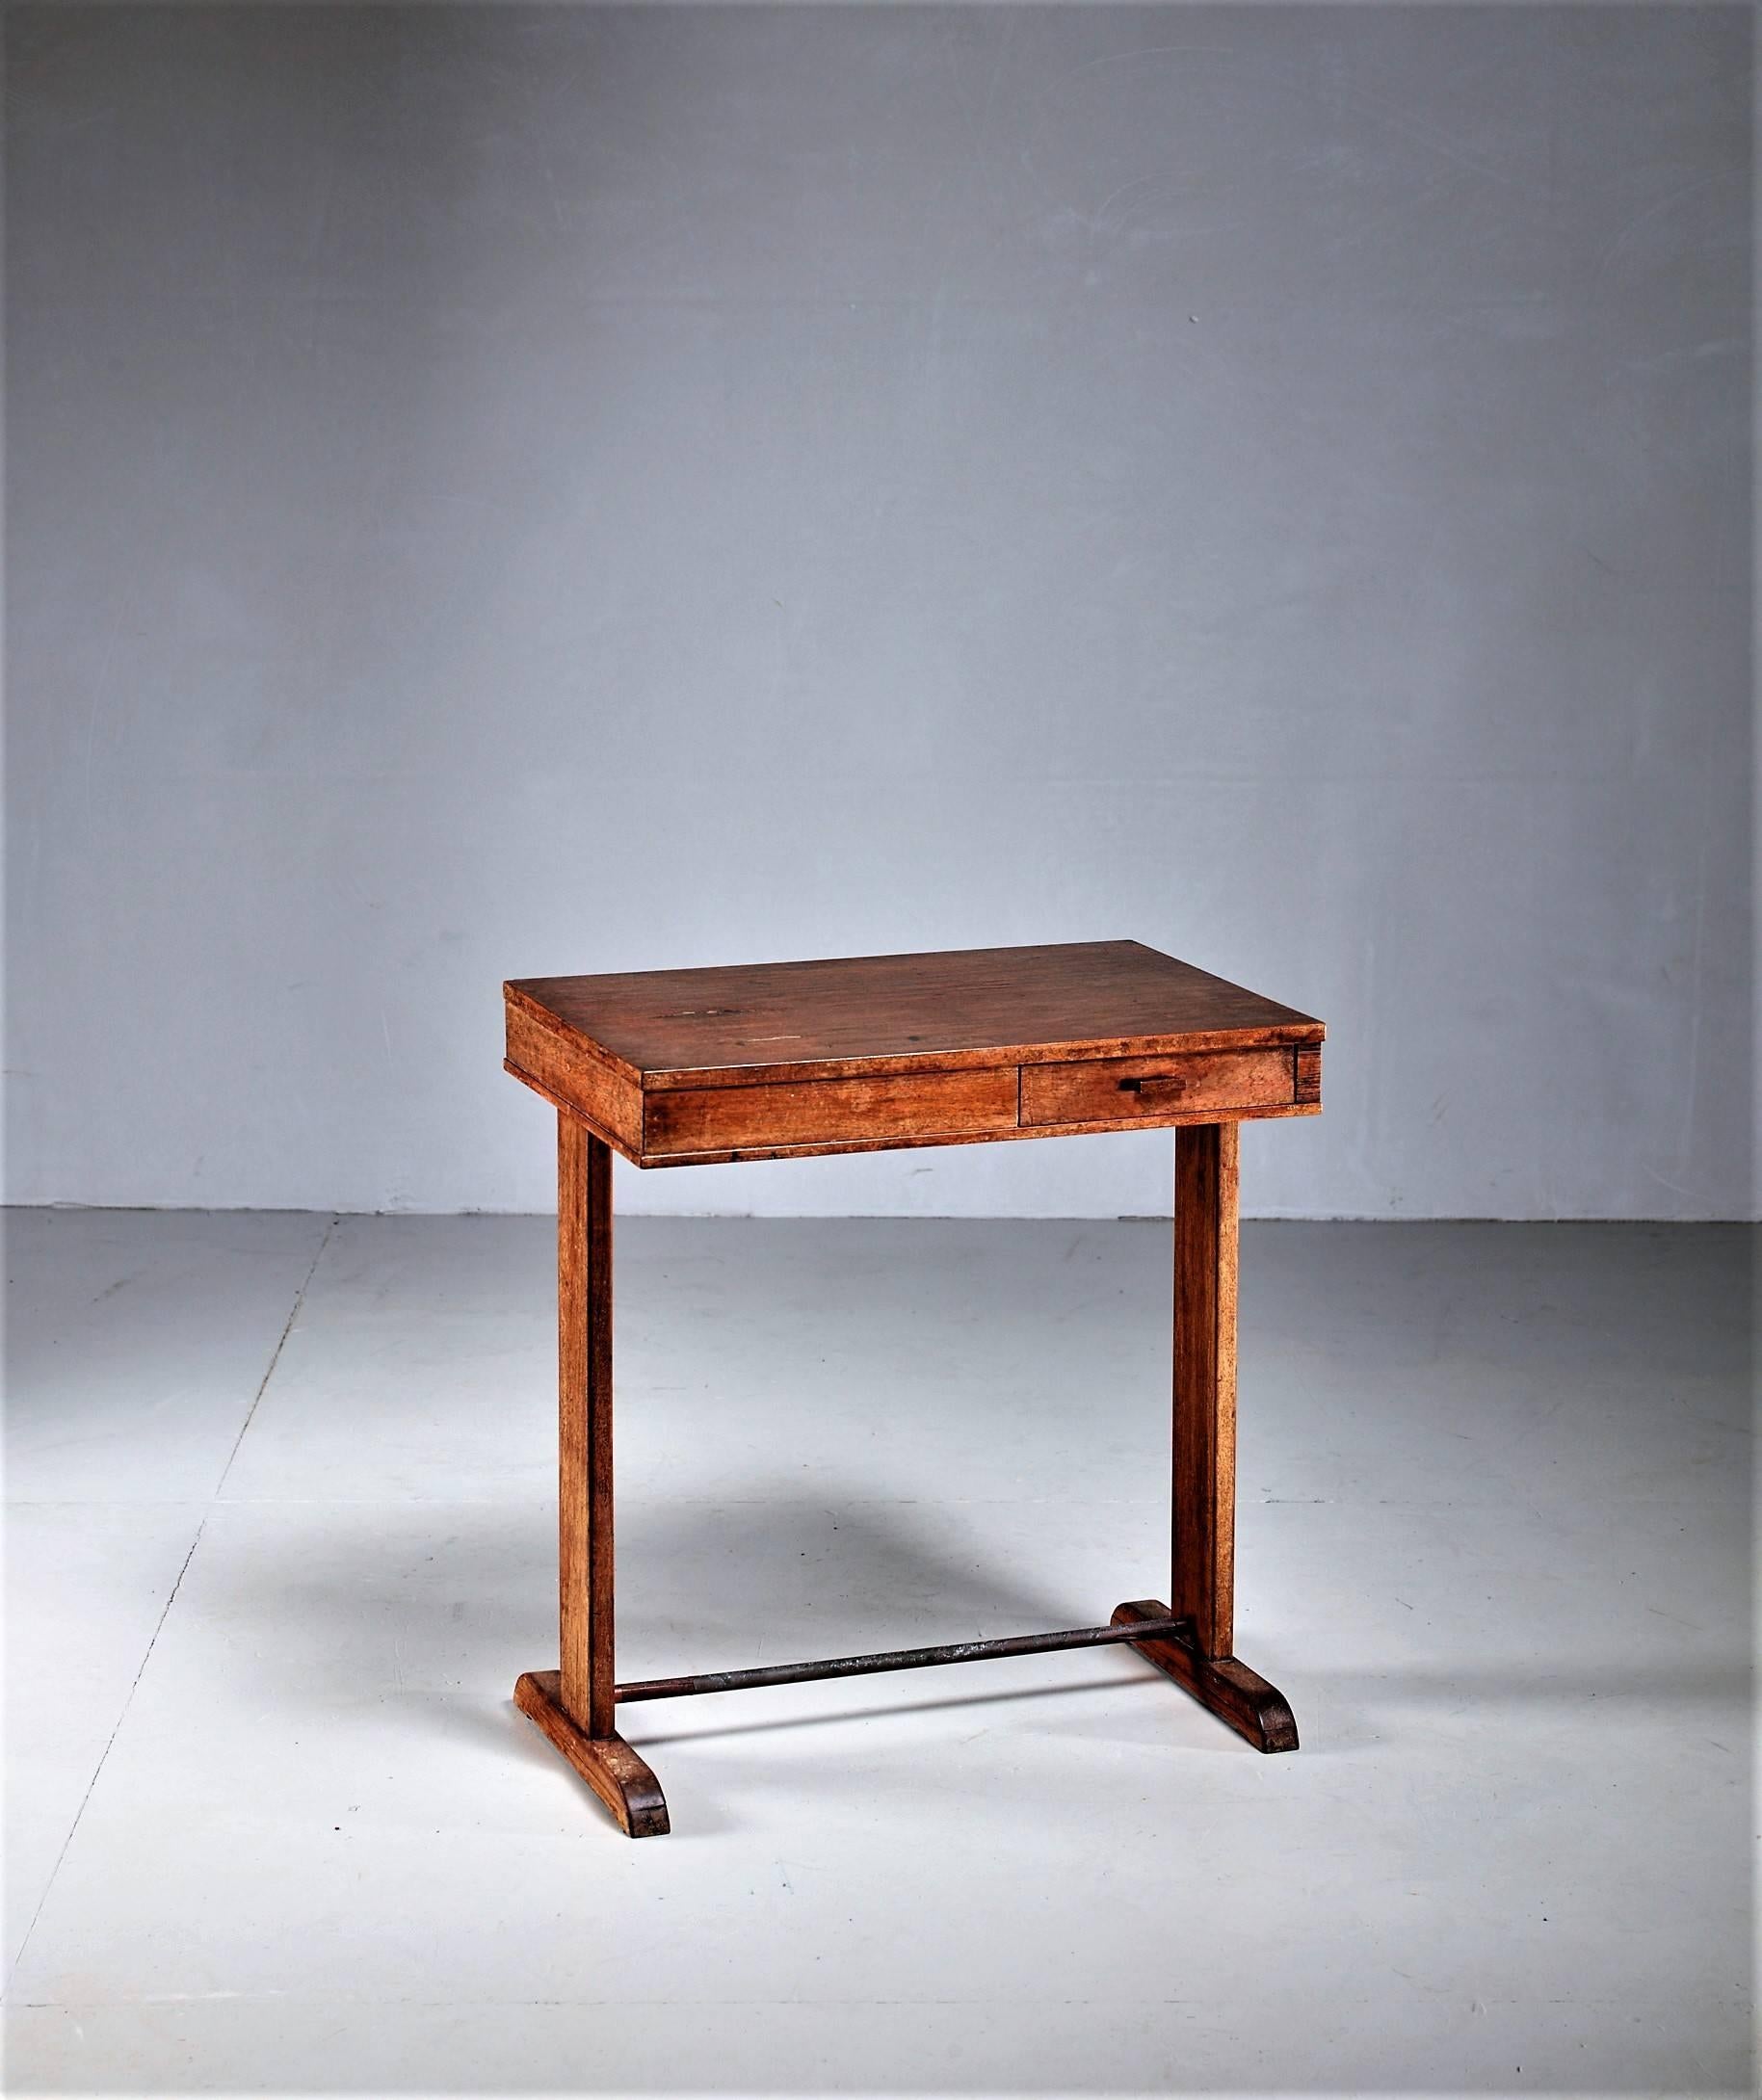 A small mahogany desk or side table by Danish designer Peder Moos, with a small drawer on each side. Apart from a few items for Fritz Hansen, Moos made all his furniture himself and directly for clients. This piece is especially unique, as it was